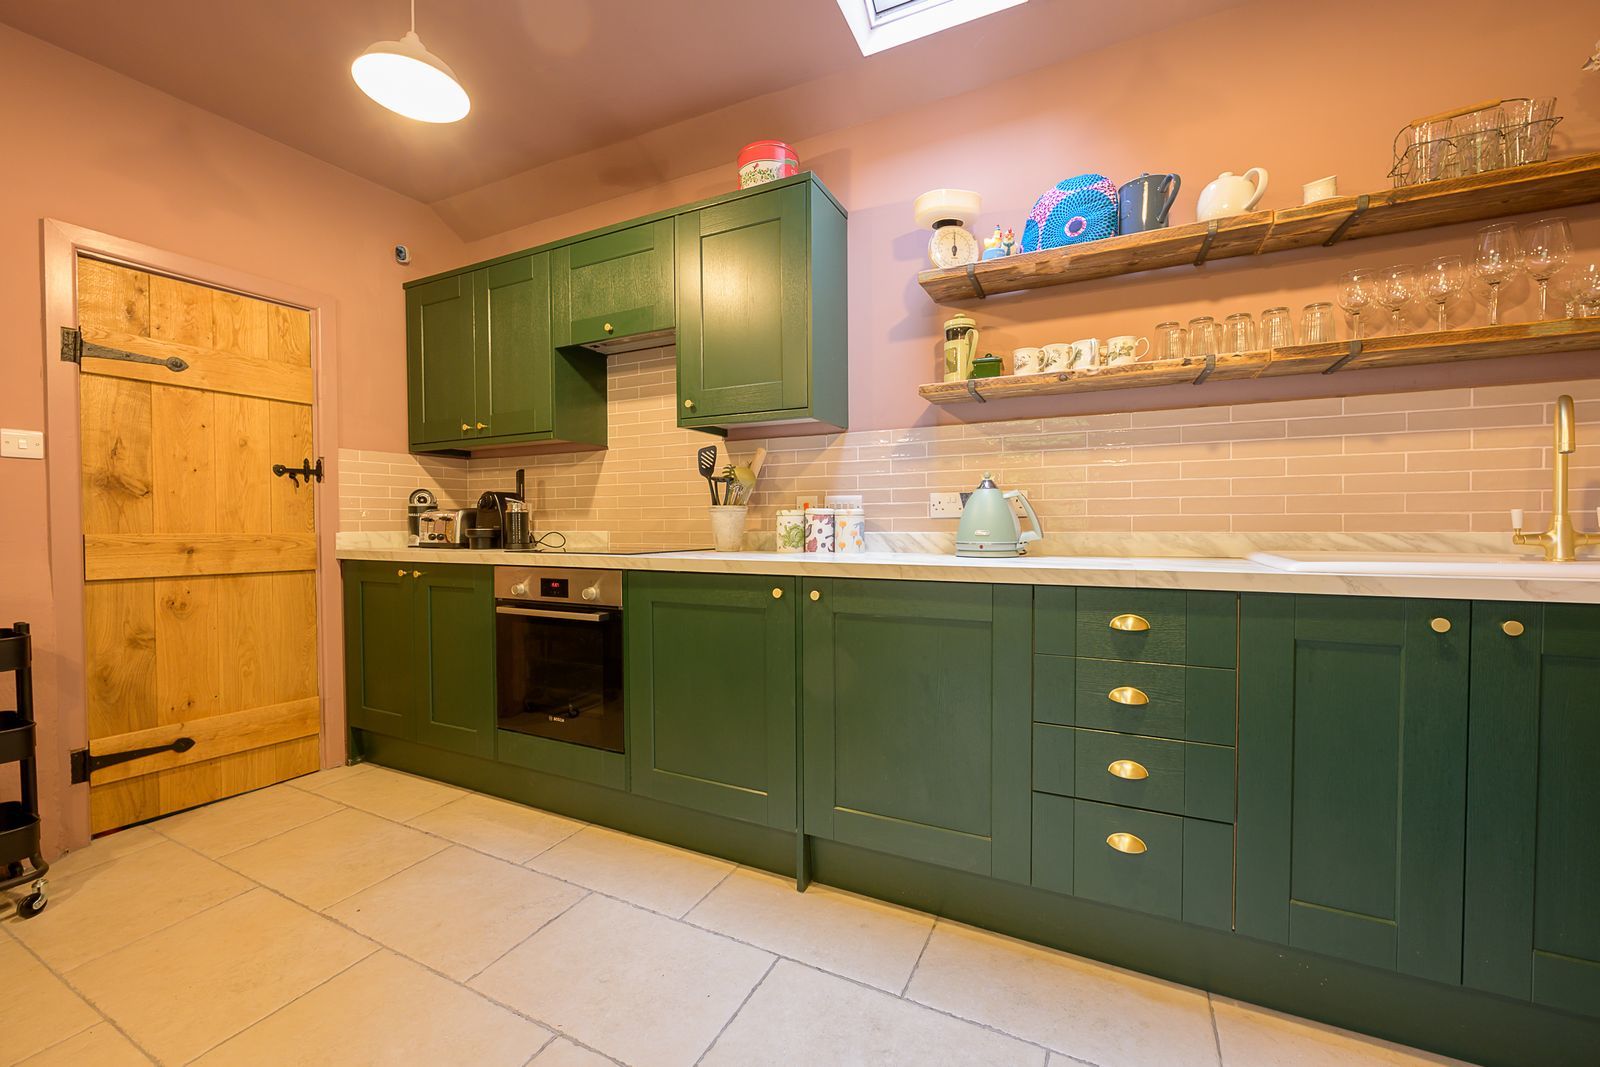 The kitchen and dining room and open plan. Picture: Hamilton Stiller Estate Agents/Zoopla